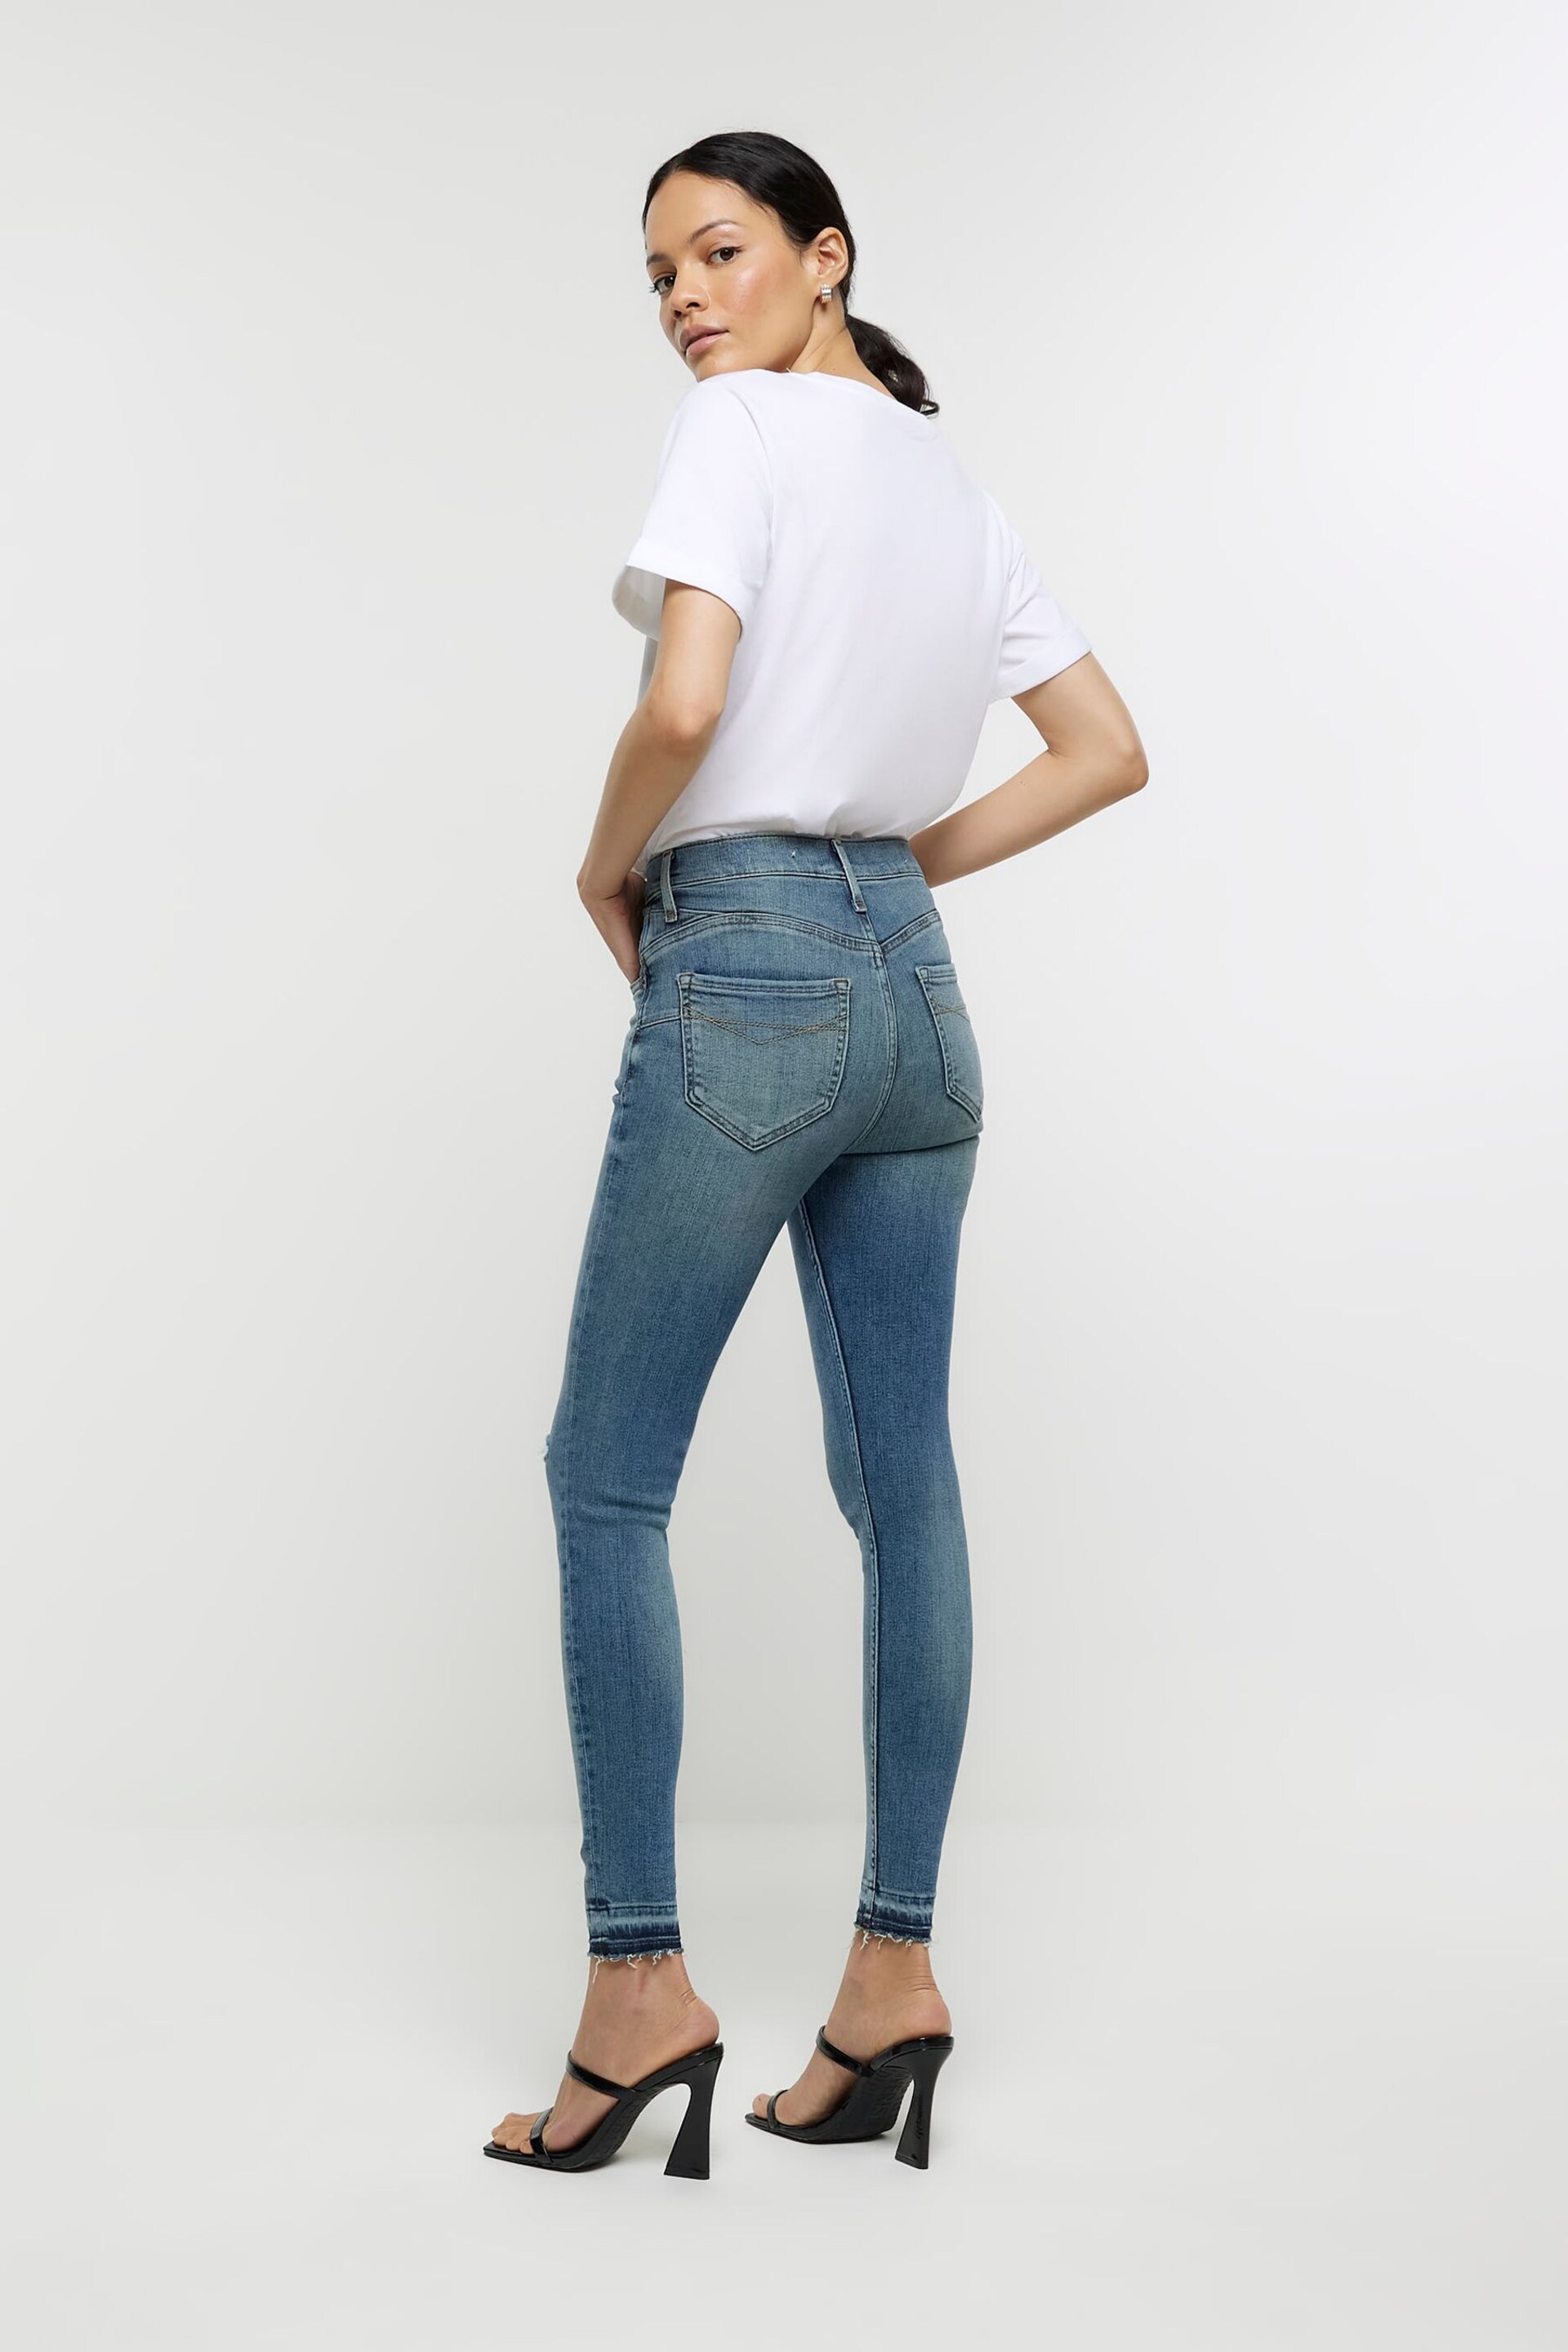 River Island Blue High Rise Tummy Hold Supper Skinny Ripped  Jeans - Image 3 of 7